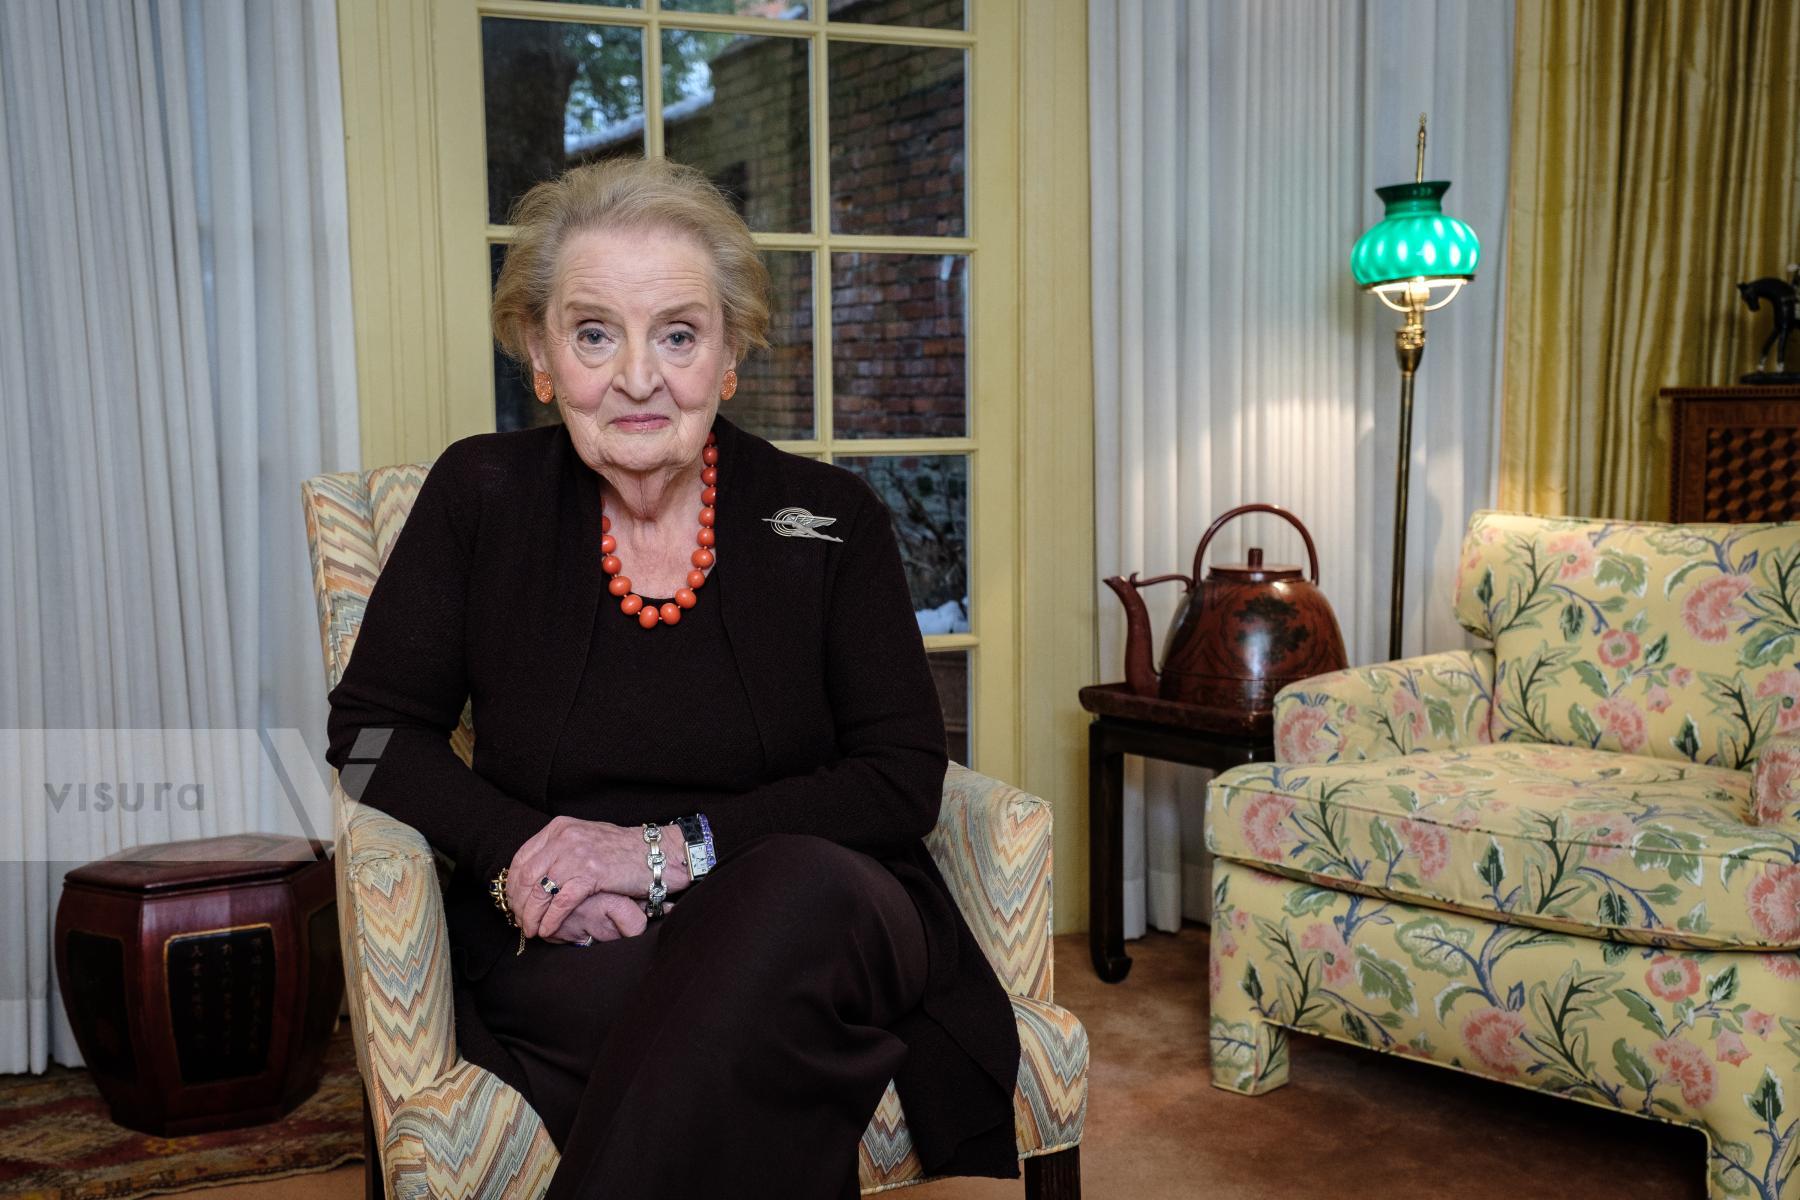 Purchase Portrait of Madeleine Albright for the Financial Times by Carla Cioffi